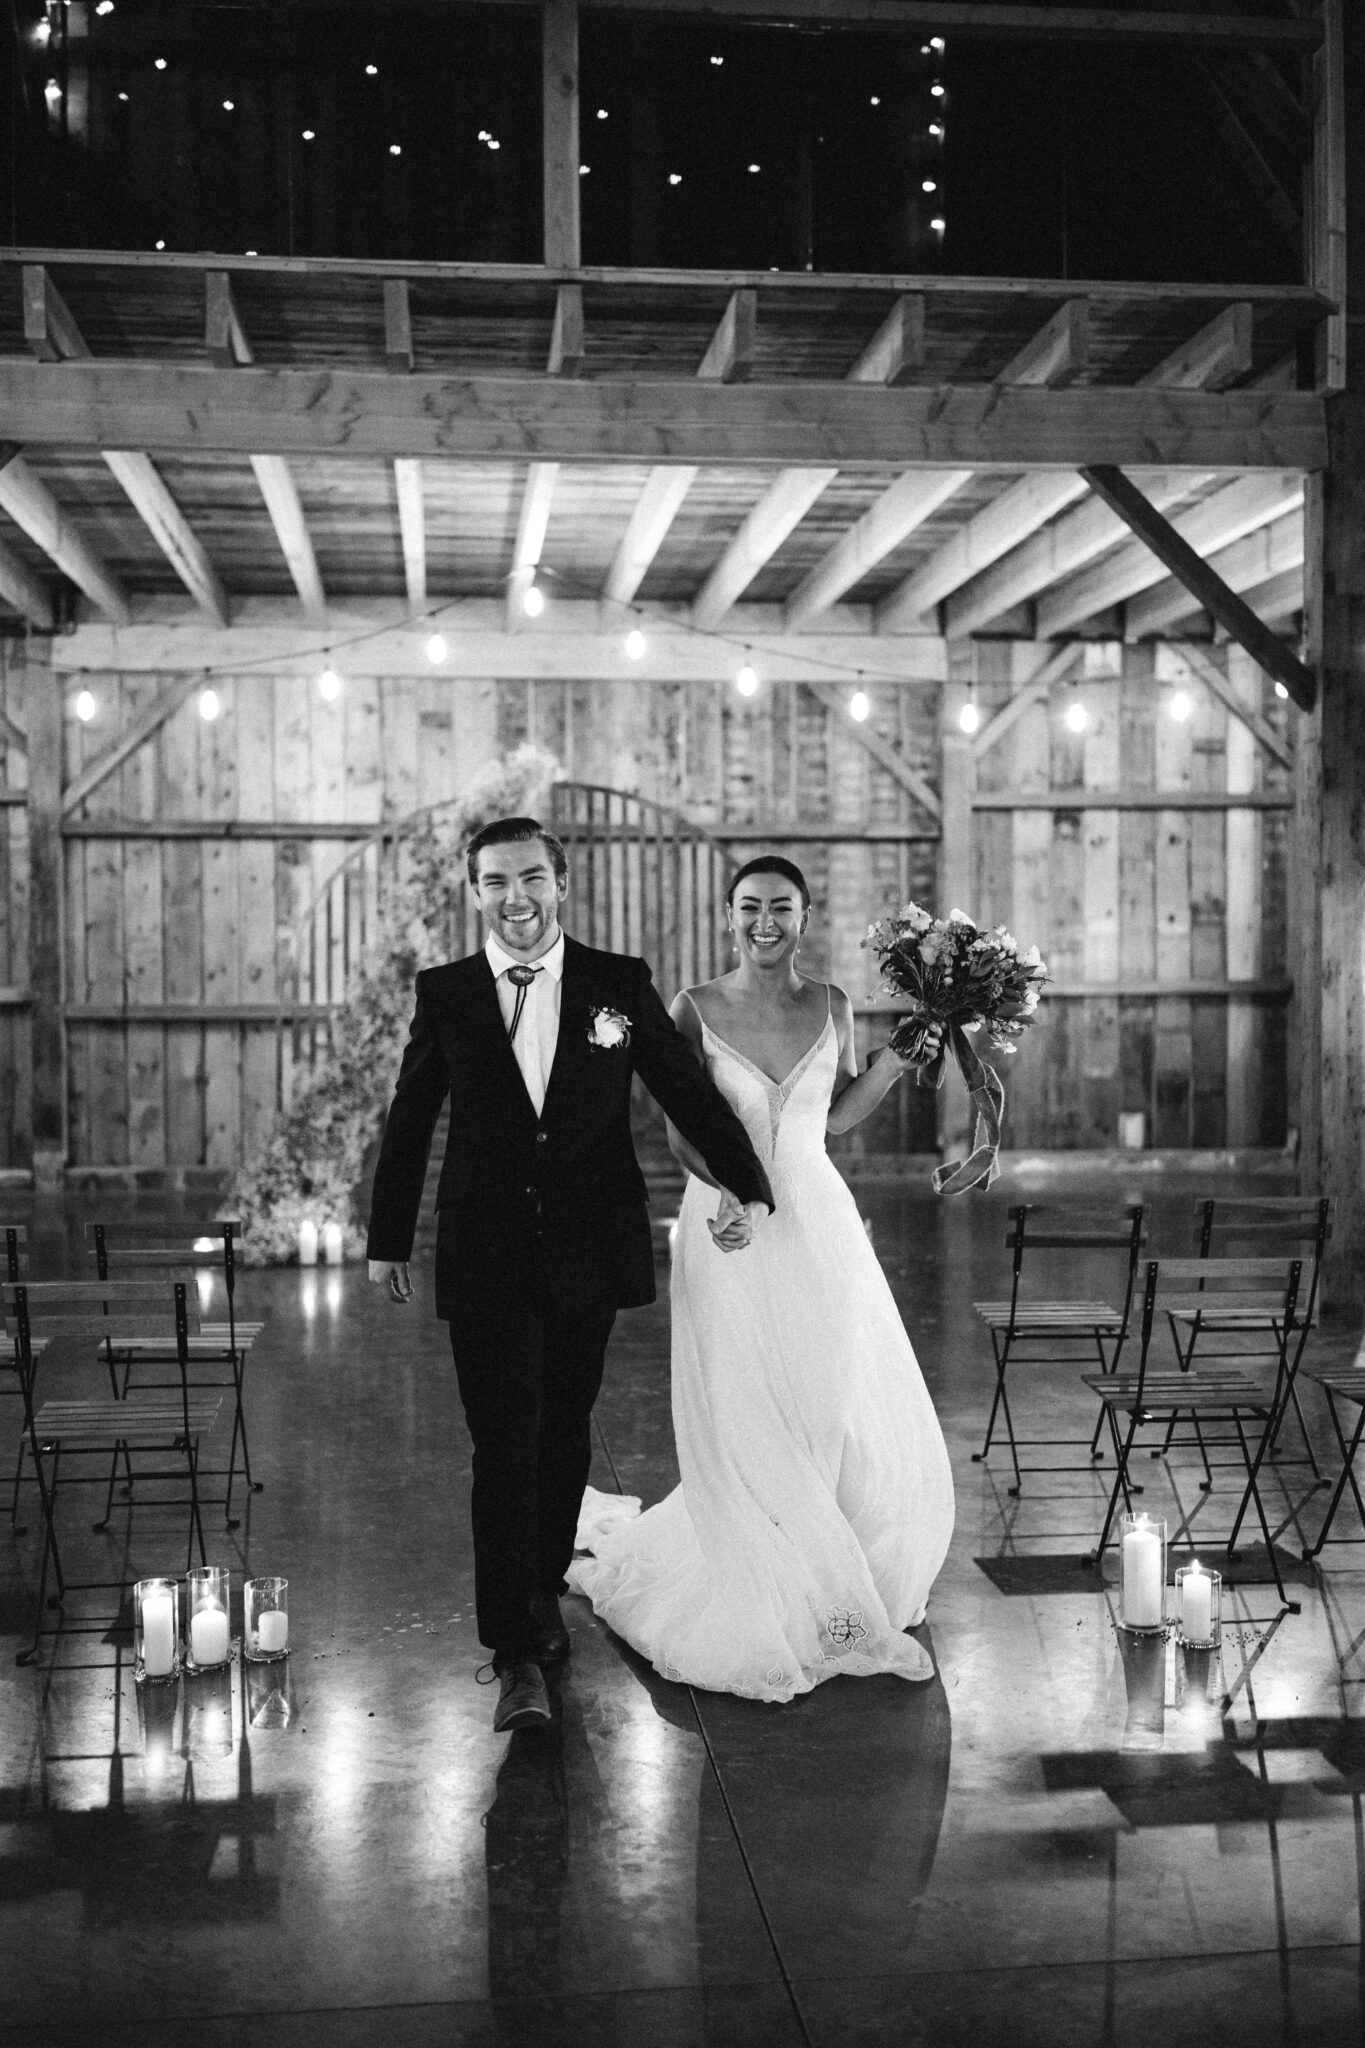 Modernized and updated take on a baby's breath installation for the ceremony arch at this Country Chic style wedding inspiration at Countryside Barn in Lethbridge Alberta, bride and groom walking down the aisle after saying "I Do", black and white photography, modern country wedding style. 